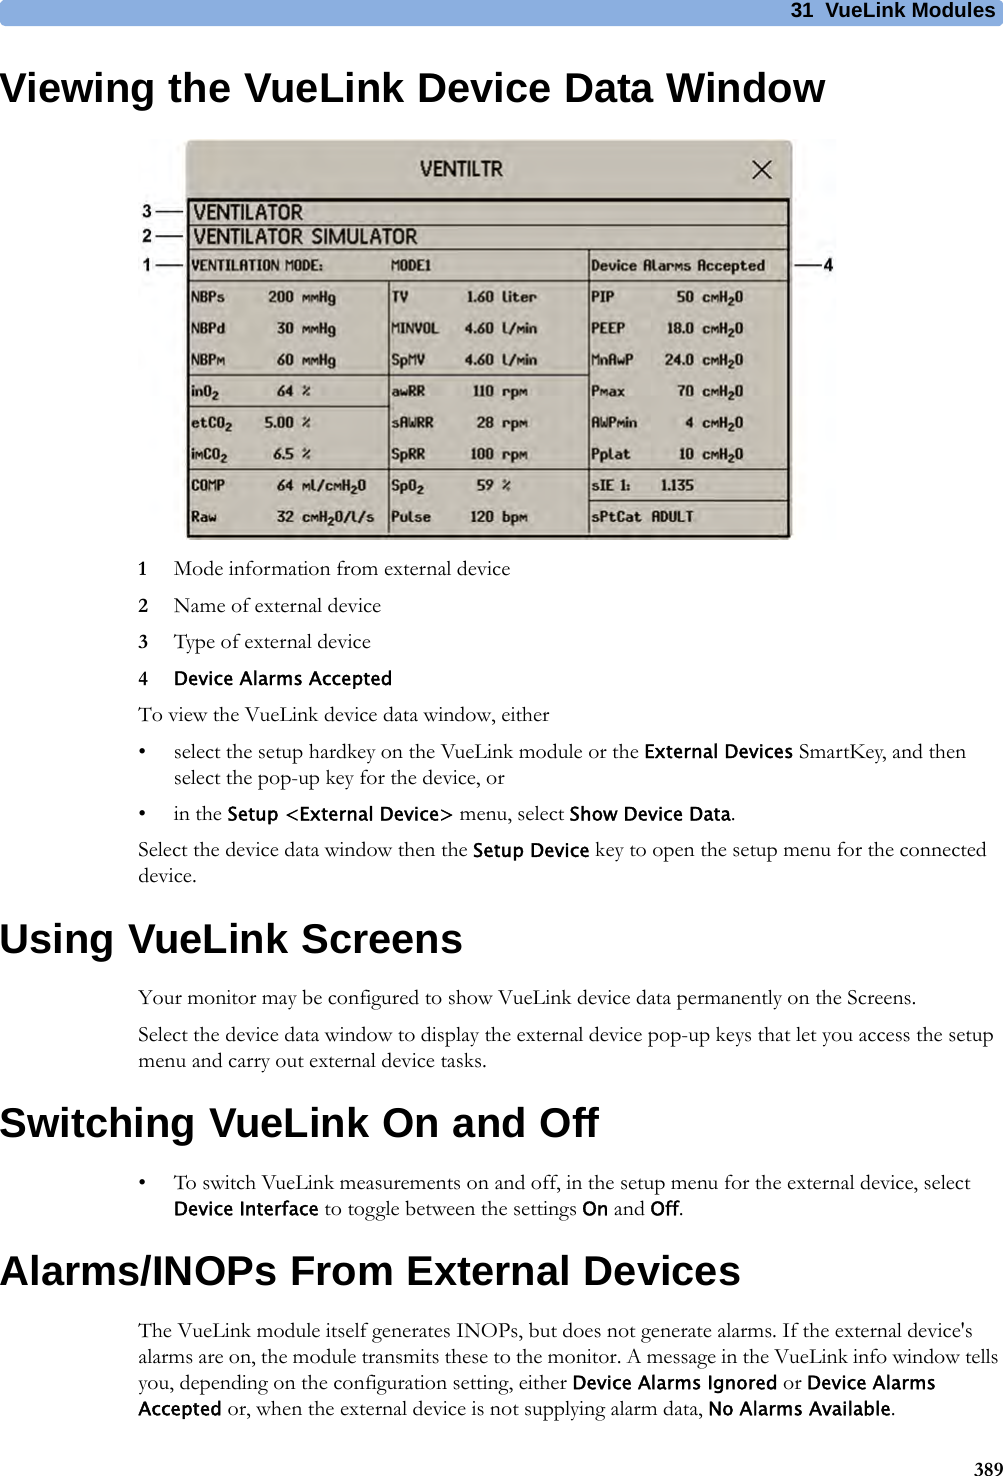 31 VueLink Modules389Viewing the VueLink Device Data Window1Mode information from external device2Name of external device3Type of external device4Device Alarms AcceptedTo view the VueLink device data window, either• select the setup hardkey on the VueLink module or the External Devices SmartKey, and then select the pop-up key for the device, or•in the Setup &lt;External Device&gt; menu, select Show Device Data.Select the device data window then the Setup Device key to open the setup menu for the connected device.Using VueLink ScreensYour monitor may be configured to show VueLink device data permanently on the Screens.Select the device data window to display the external device pop-up keys that let you access the setup menu and carry out external device tasks.Switching VueLink On and Off• To switch VueLink measurements on and off, in the setup menu for the external device, select Device Interface to toggle between the settings On and Off.Alarms/INOPs From External DevicesThe VueLink module itself generates INOPs, but does not generate alarms. If the external device&apos;s alarms are on, the module transmits these to the monitor. A message in the VueLink info window tells you, depending on the configuration setting, either Device Alarms Ignored or Device Alarms Accepted or, when the external device is not supplying alarm data, No Alarms Available. 